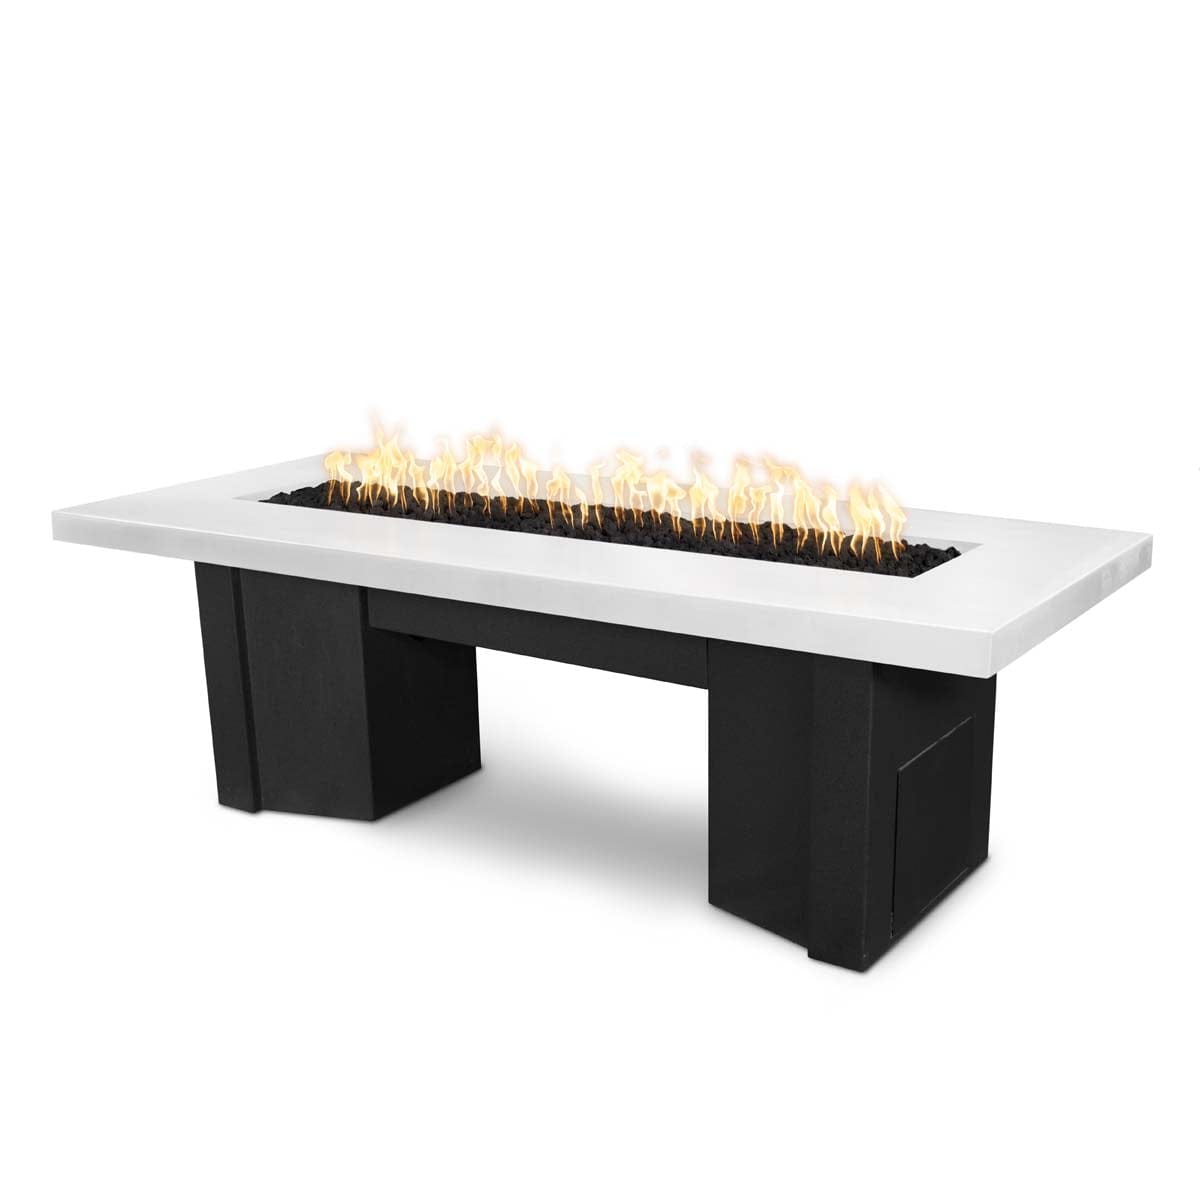 The Outdoor Plus Fire Features The Outdoor Plus 48&quot;, 60&quot;, 78&quot; Alameda Rectangular Fire Table - Powder Coated White Top &amp; Black Base / OPT-ALMPCxx-BWC, OPT-ALMPCxx-BWCFSML, OPT-ALMPCxx-BWCFSEN, OPT-ALMPCxx-BWCE12V, OPT-ALMPCxx-BWCEKIT